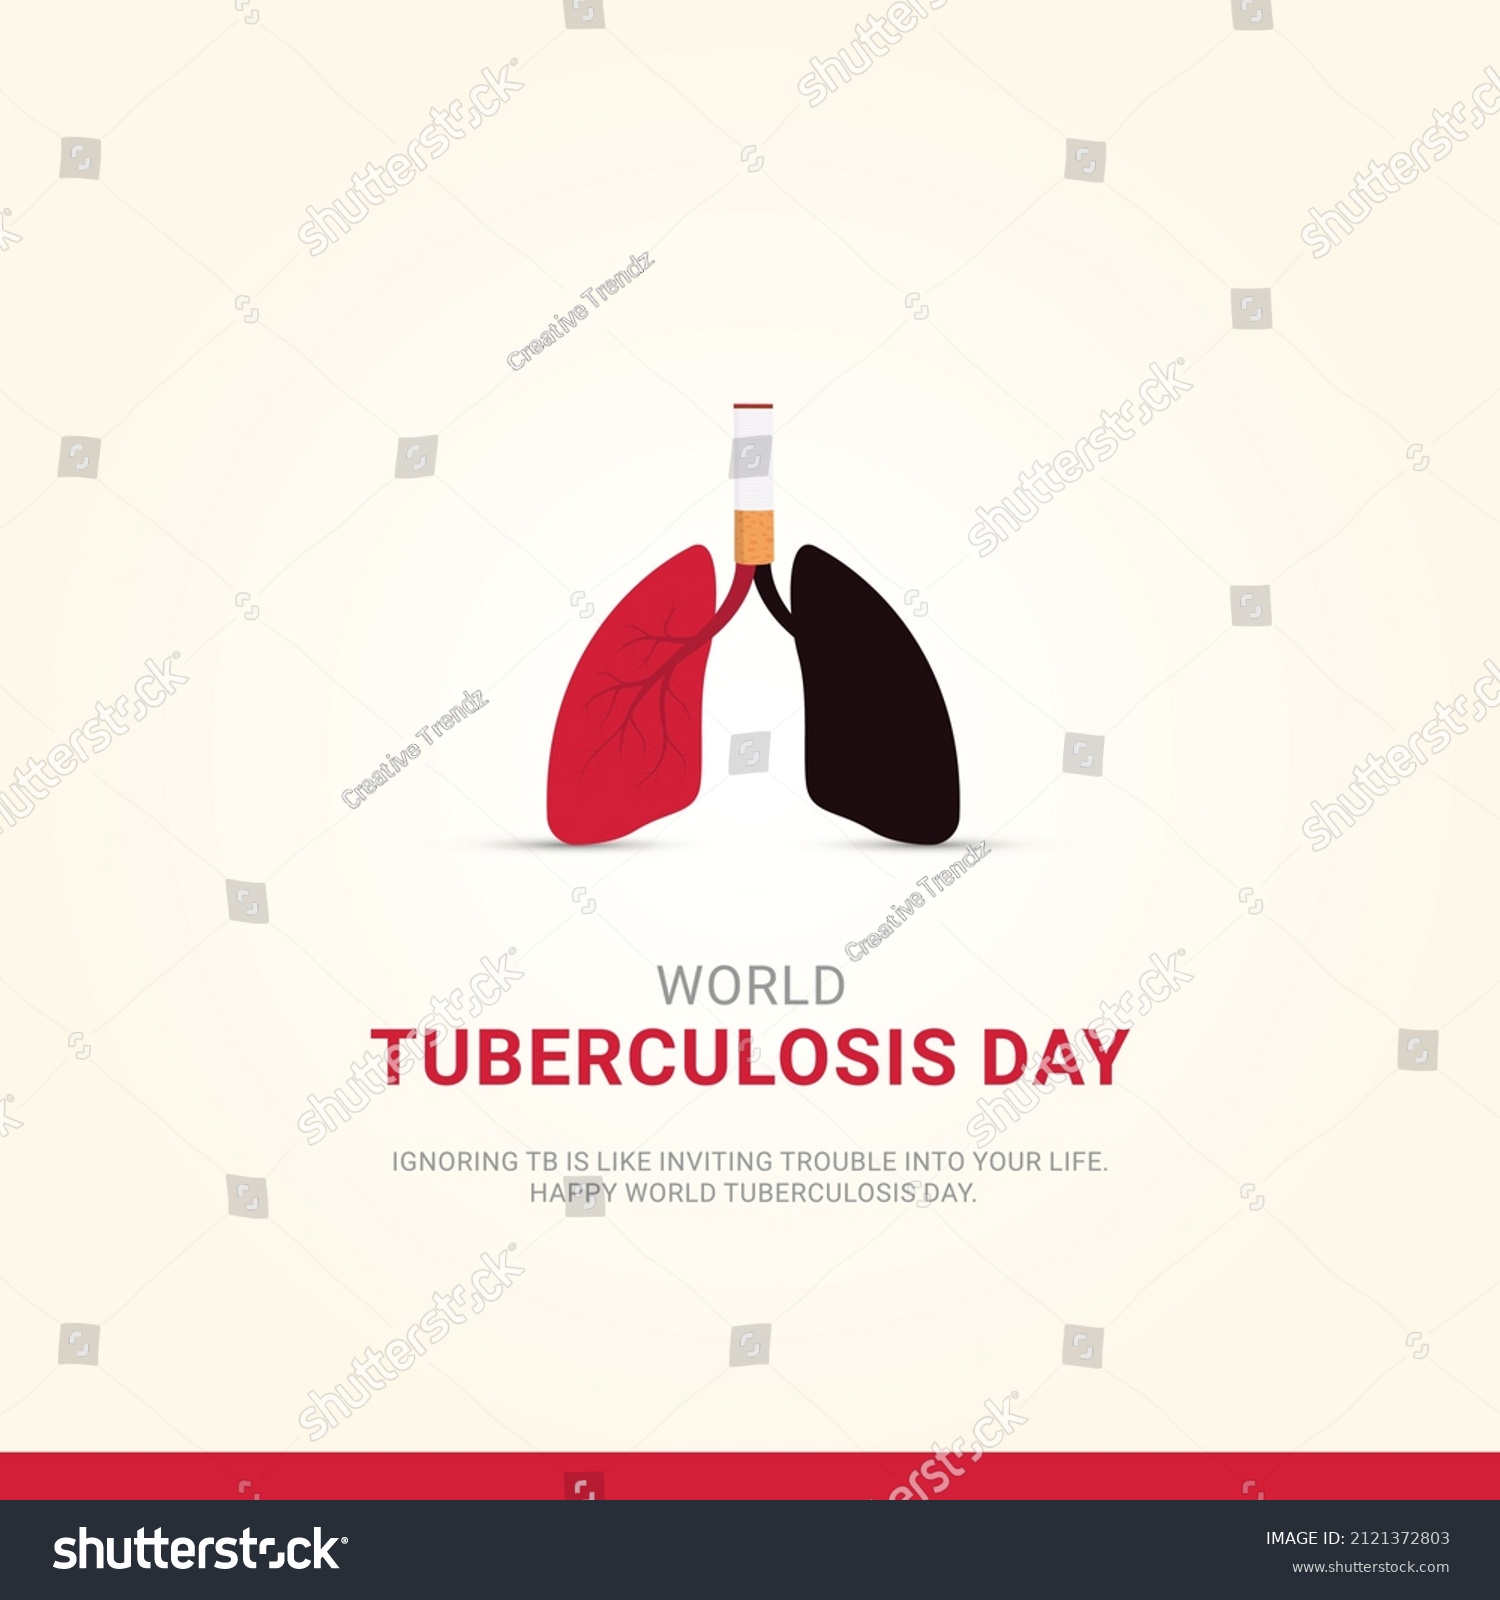 World Tb Day Cigarette Lungs Design Stock Vector (Royalty Free ...